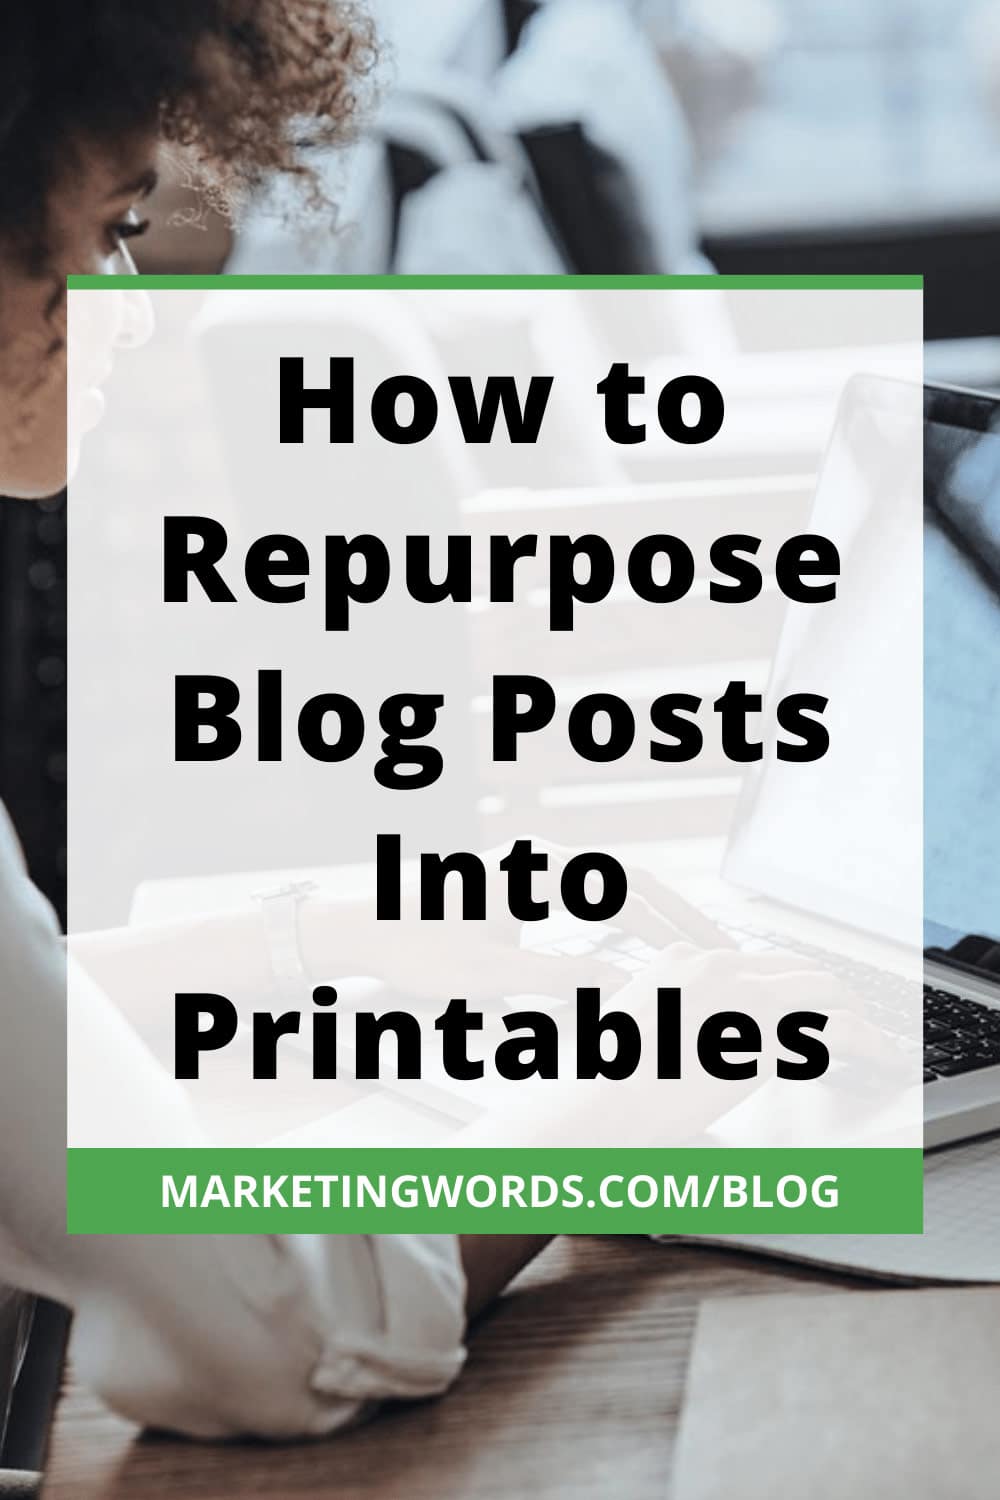 How to Repurpose Blog Posts Into Printables